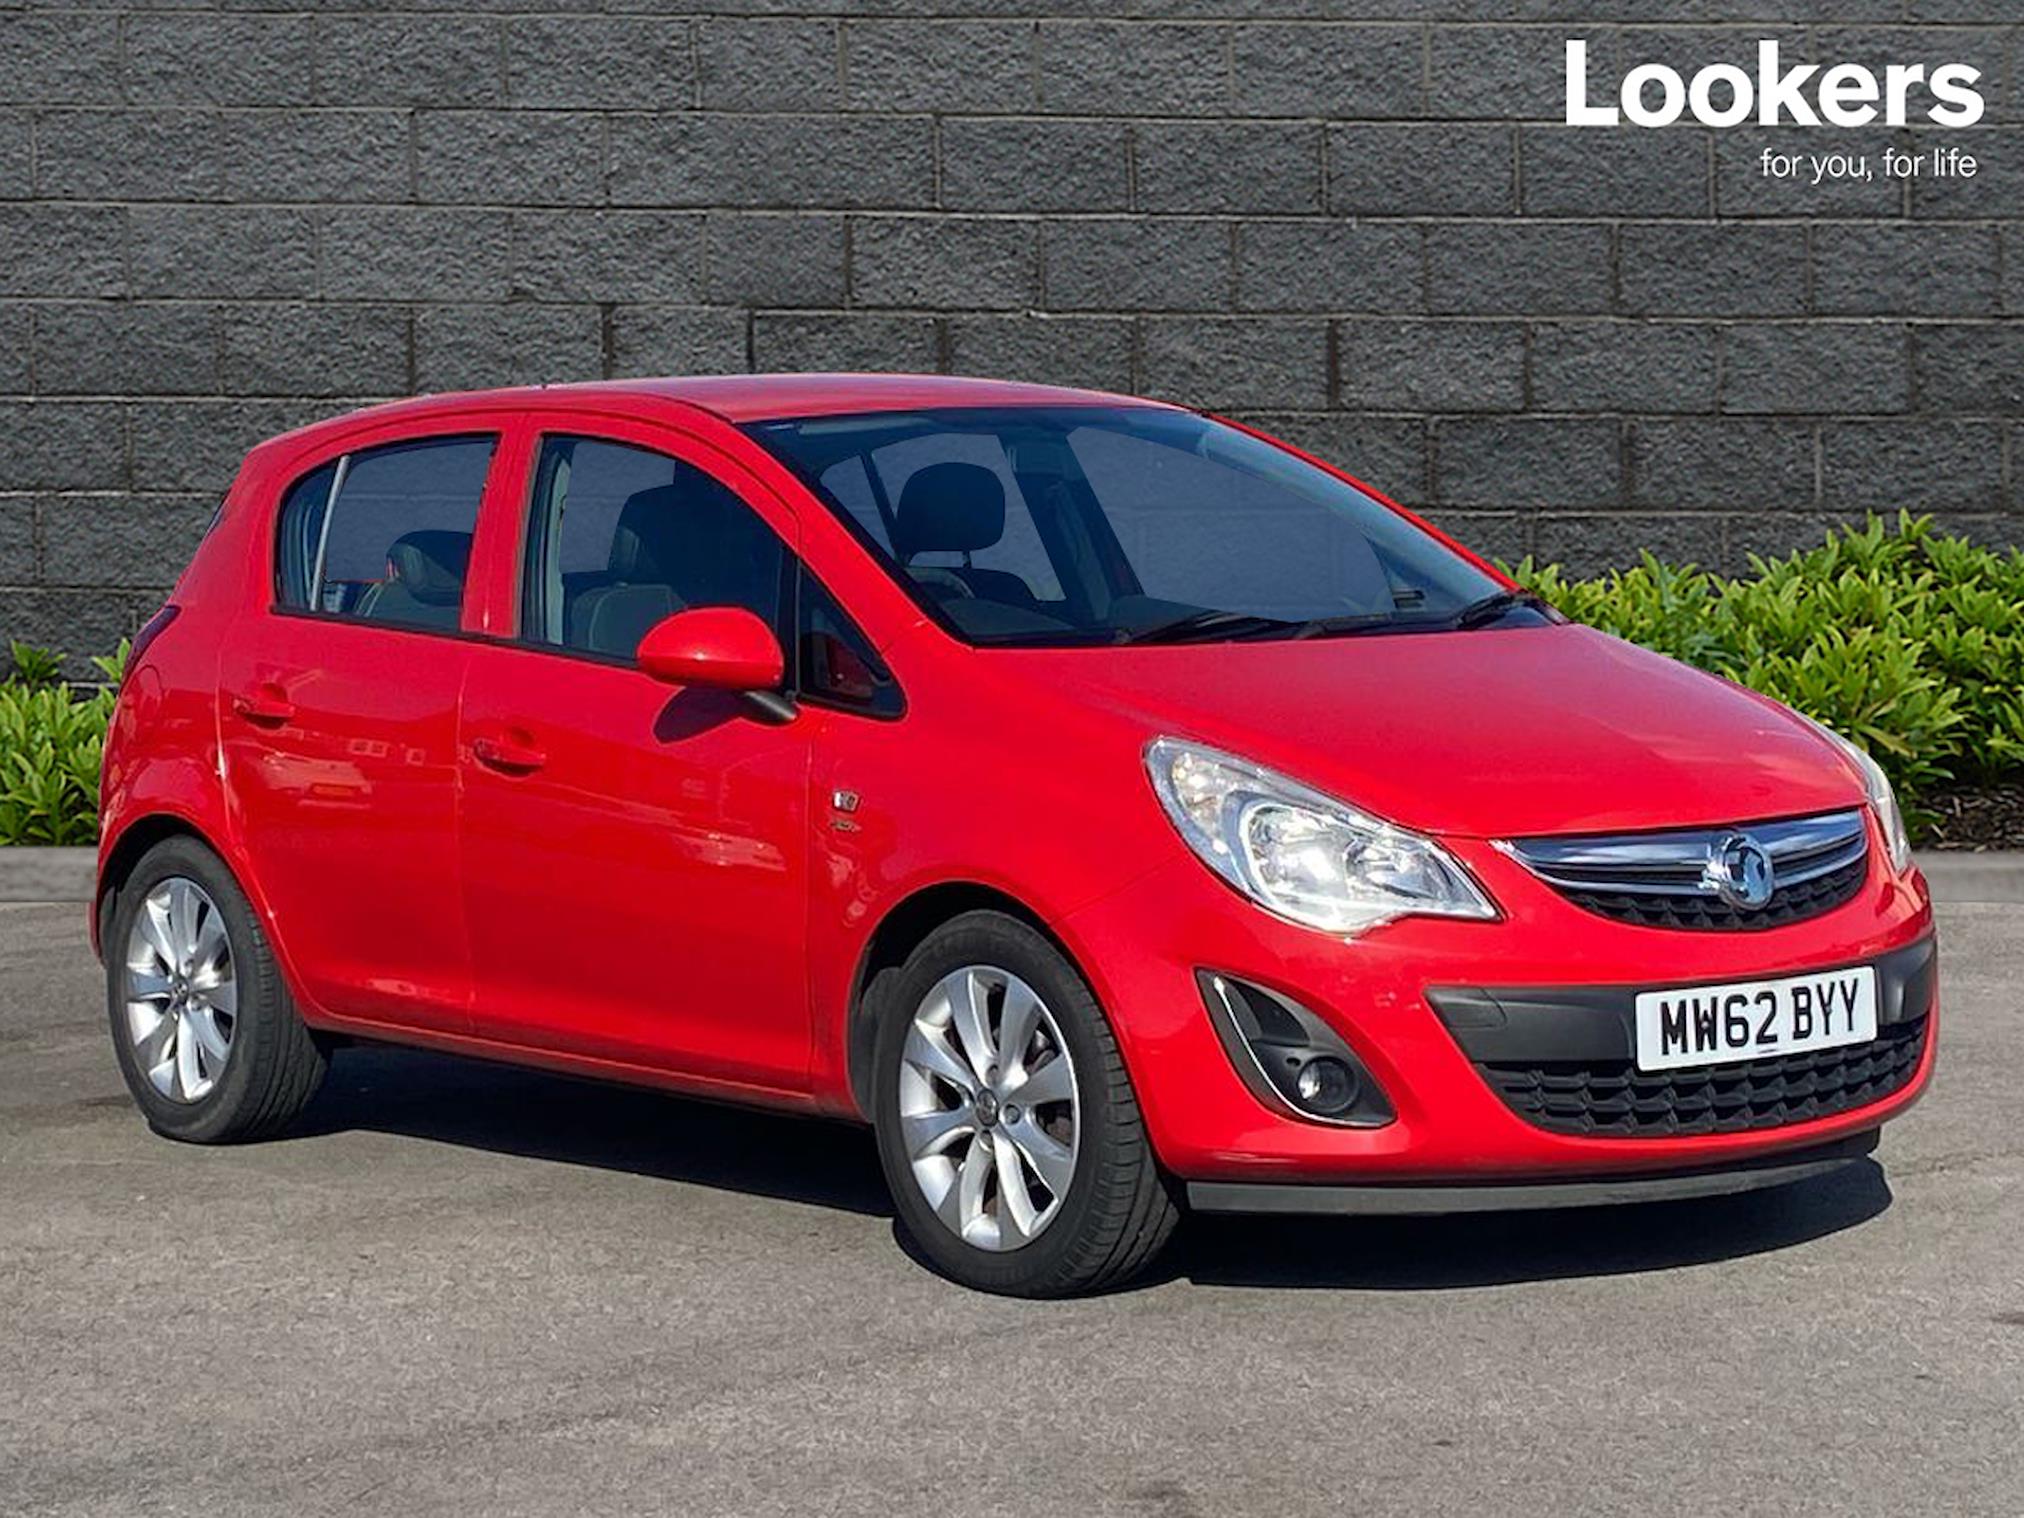 Used VAUXHALL CORSA 1.4 Active 5Dr [Ac] 2012